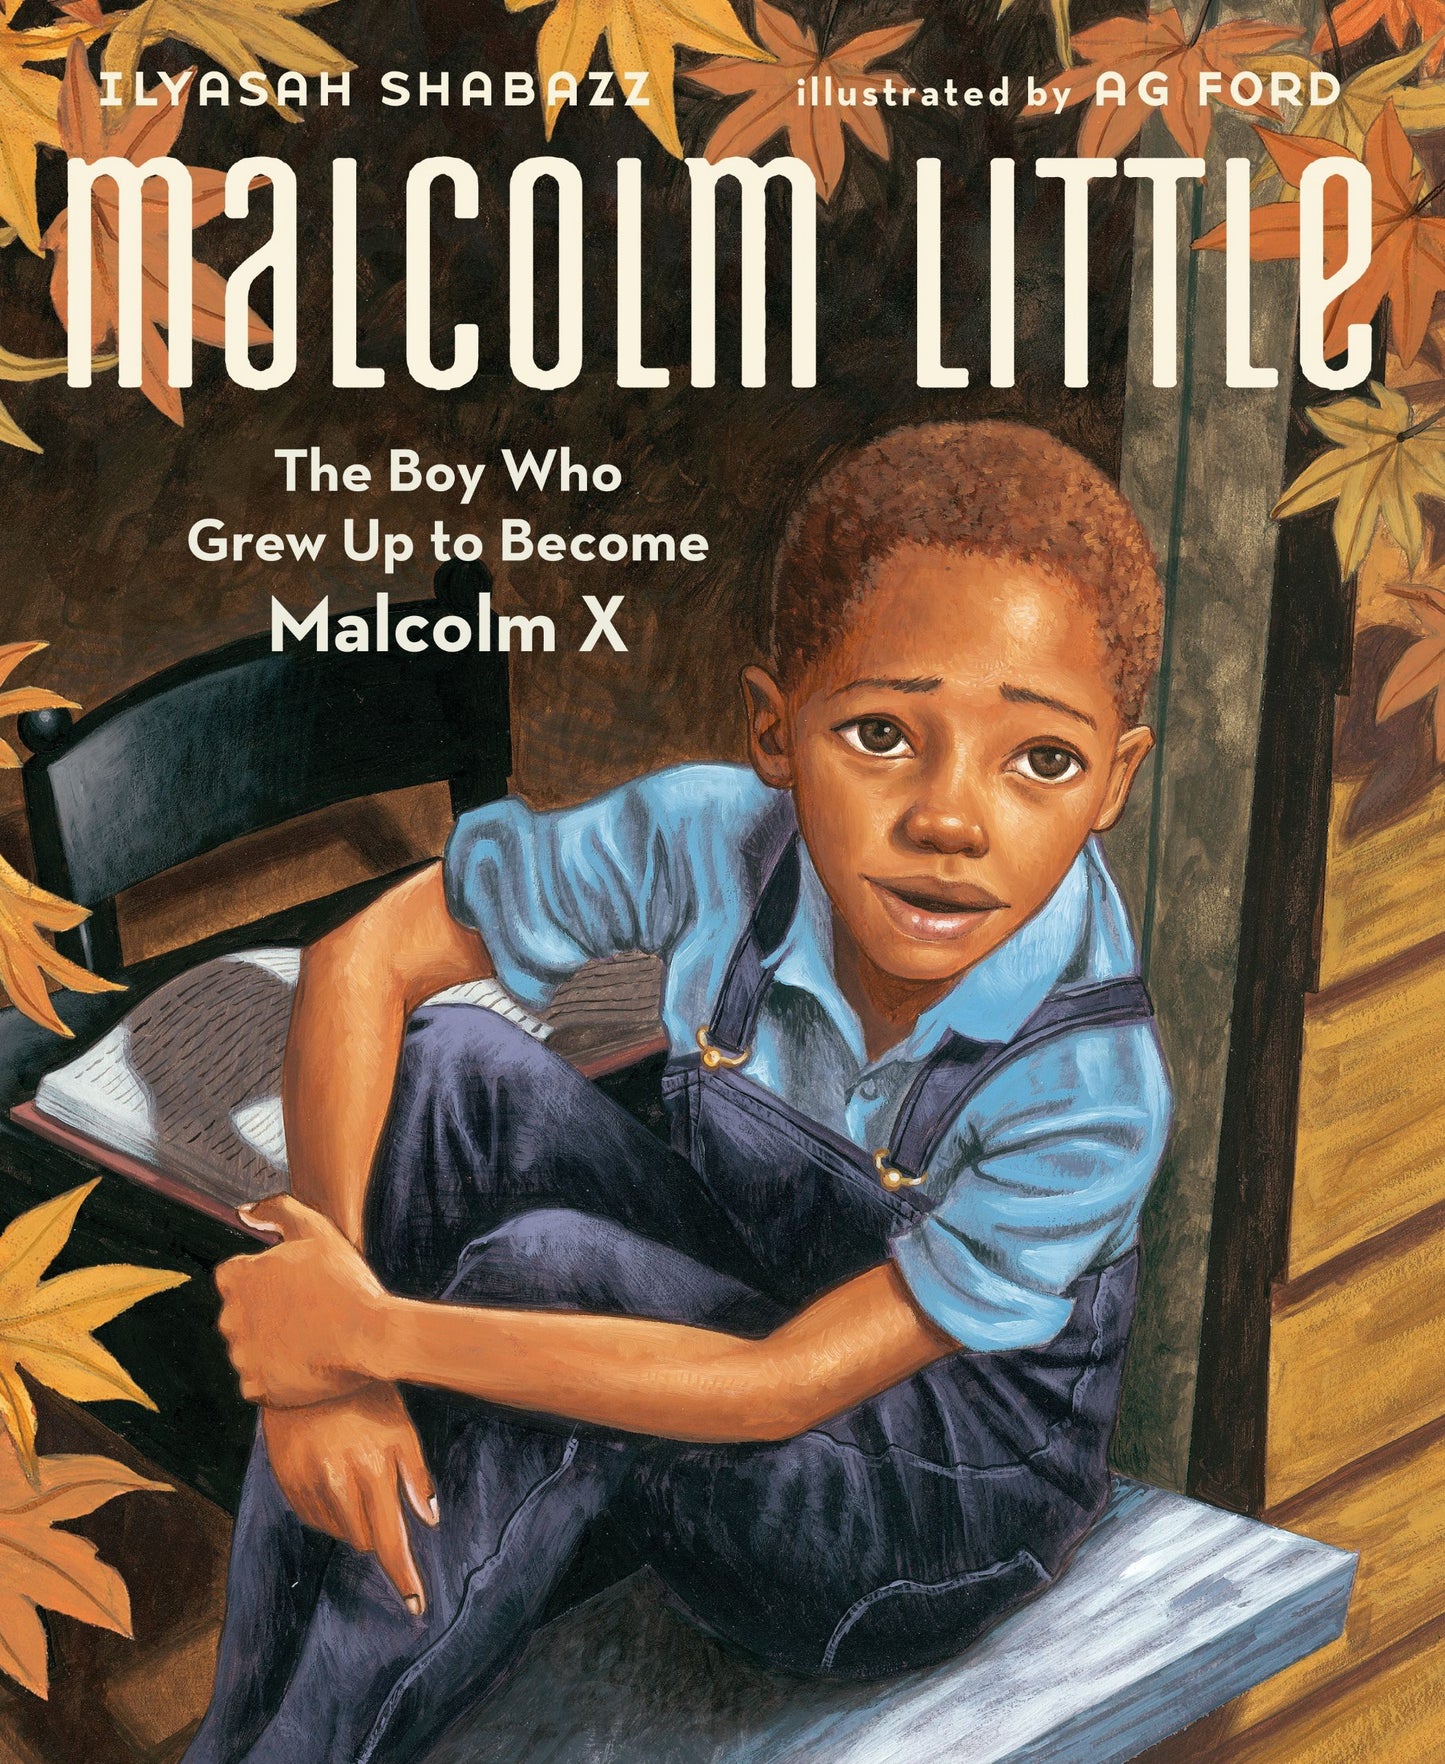 Malcolm Little // The Boy Who Grew Up to Become Malcolm X